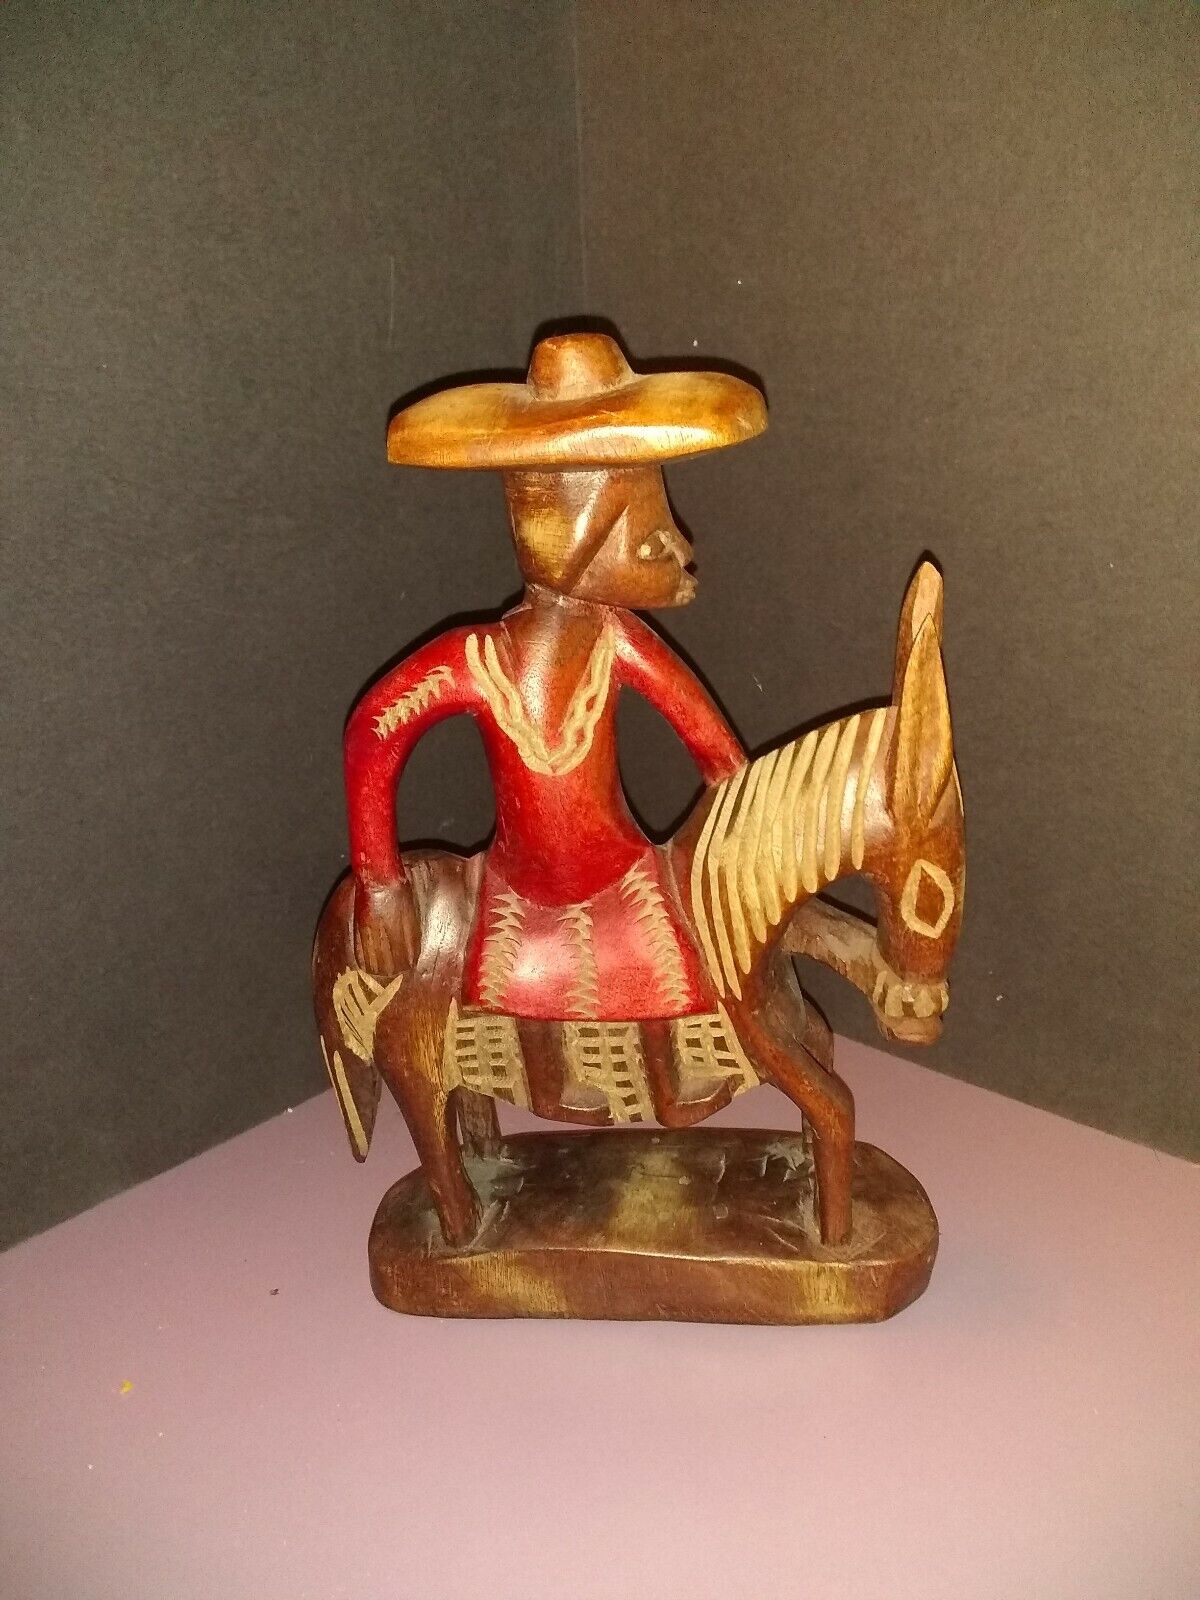 Vintage Wooden Statue of African Woman Riding Side Saddle on a Horse